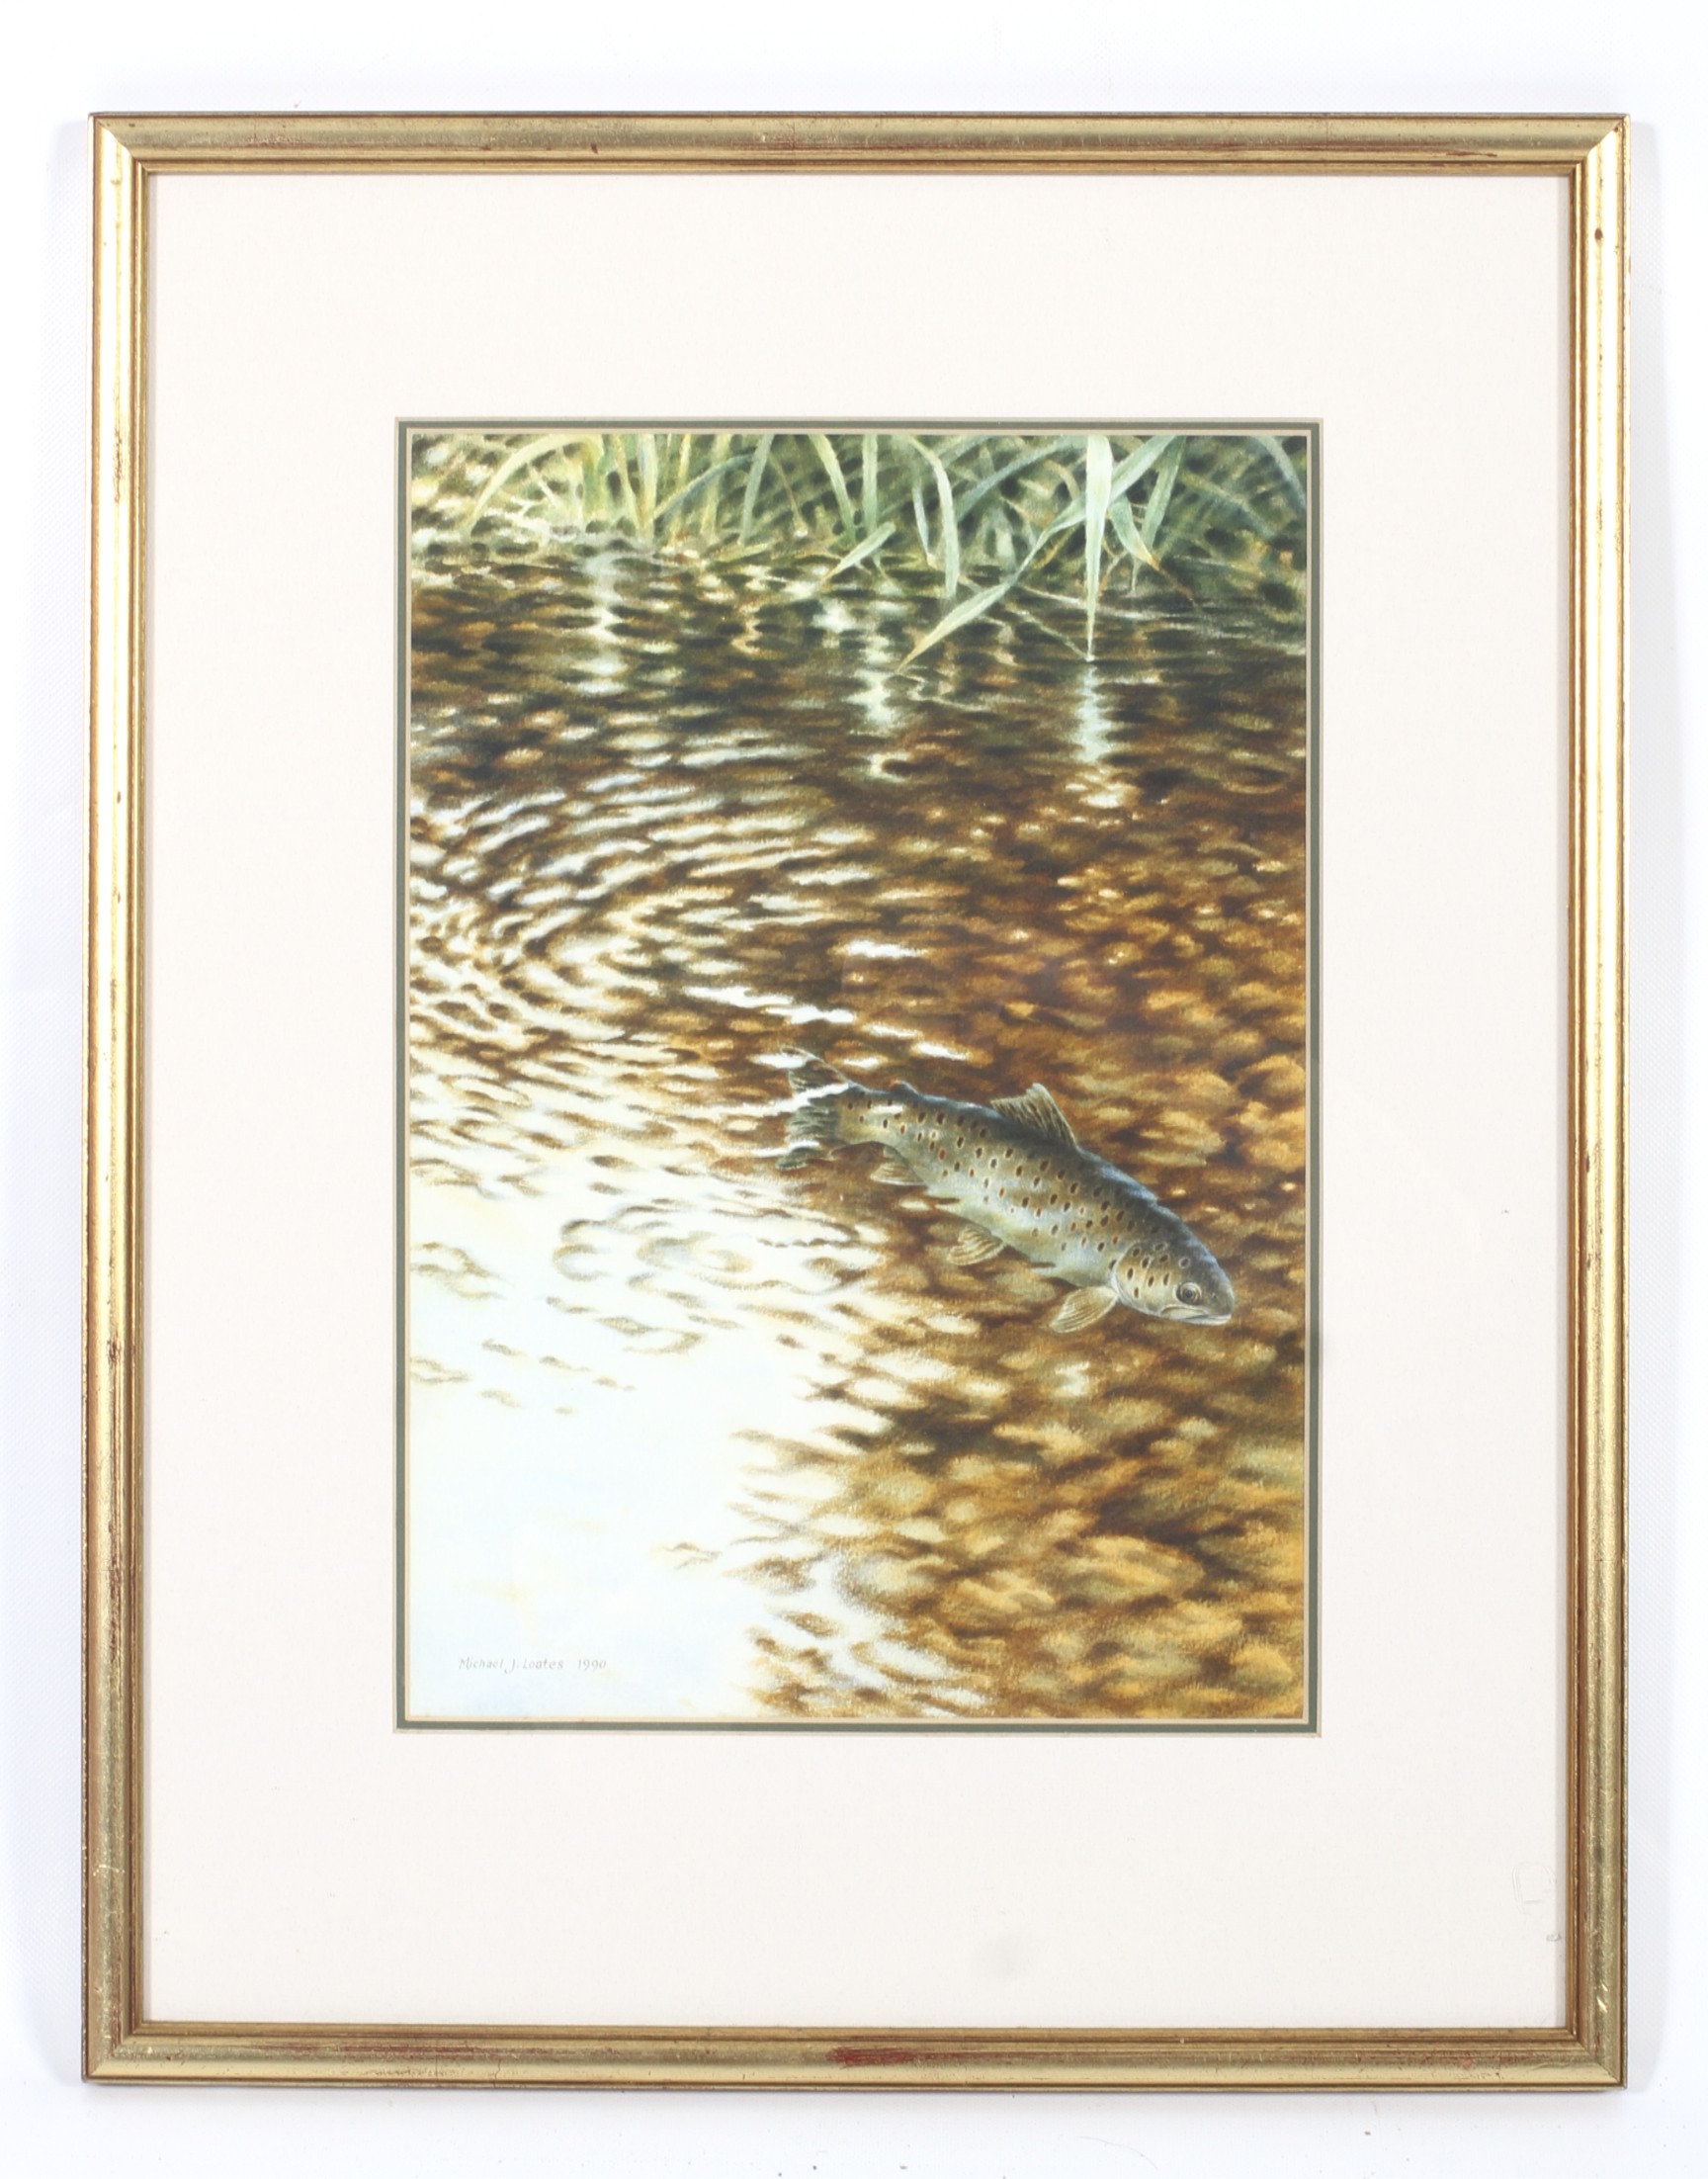 Michael J Loates (1947) watercolour, Brown Trout swimming in a chalk stream/river. - Image 3 of 3